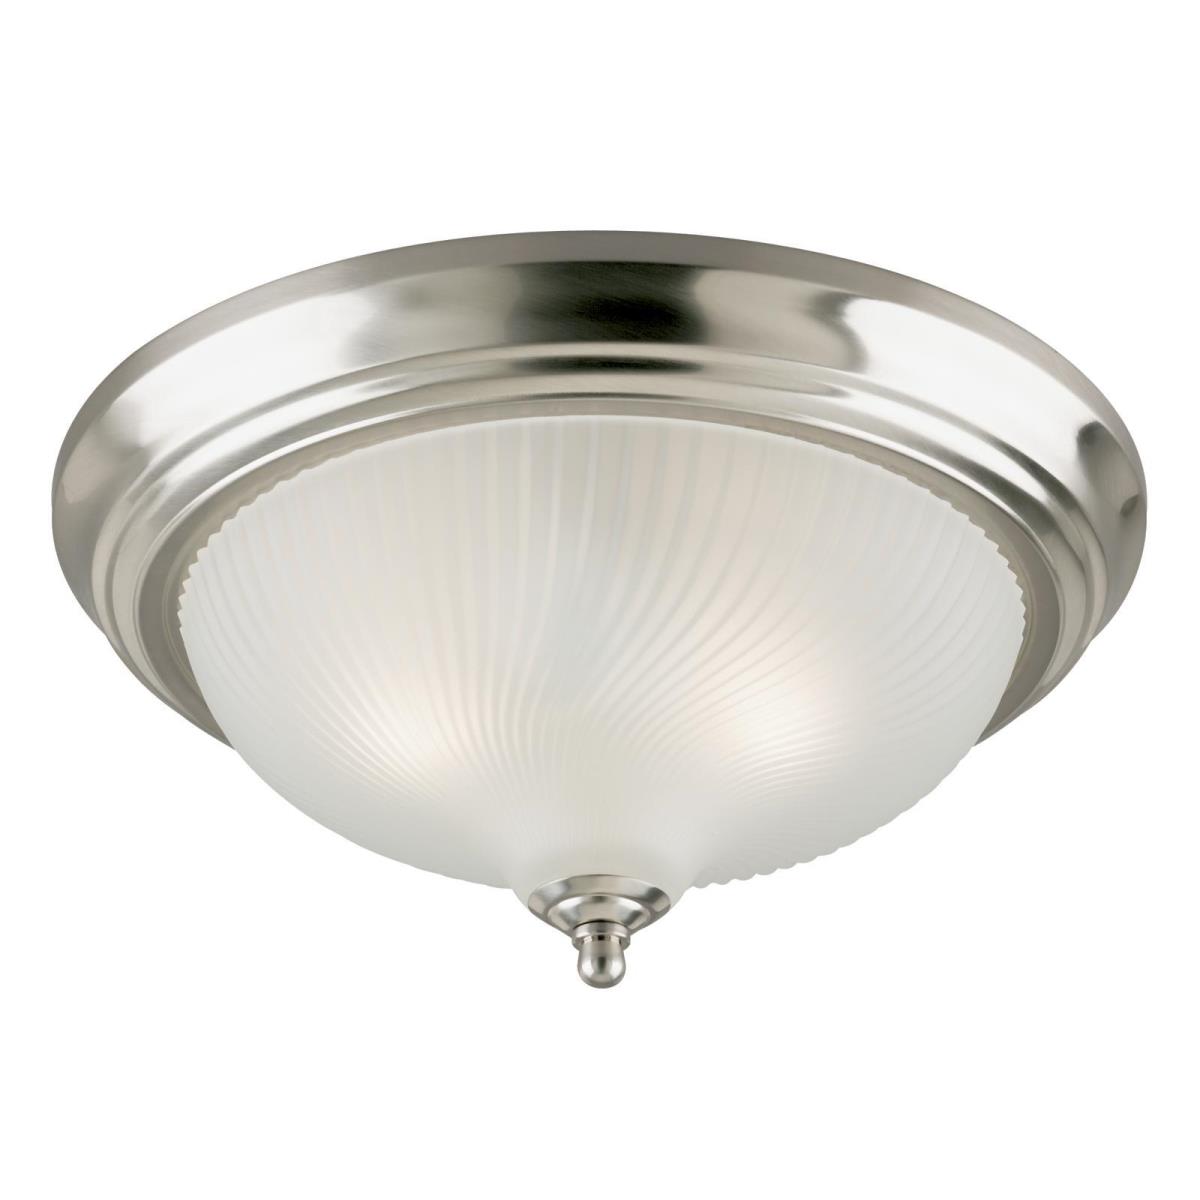 3 Light Flush Brushed Nickel Finish with Frosted Swirl Glass